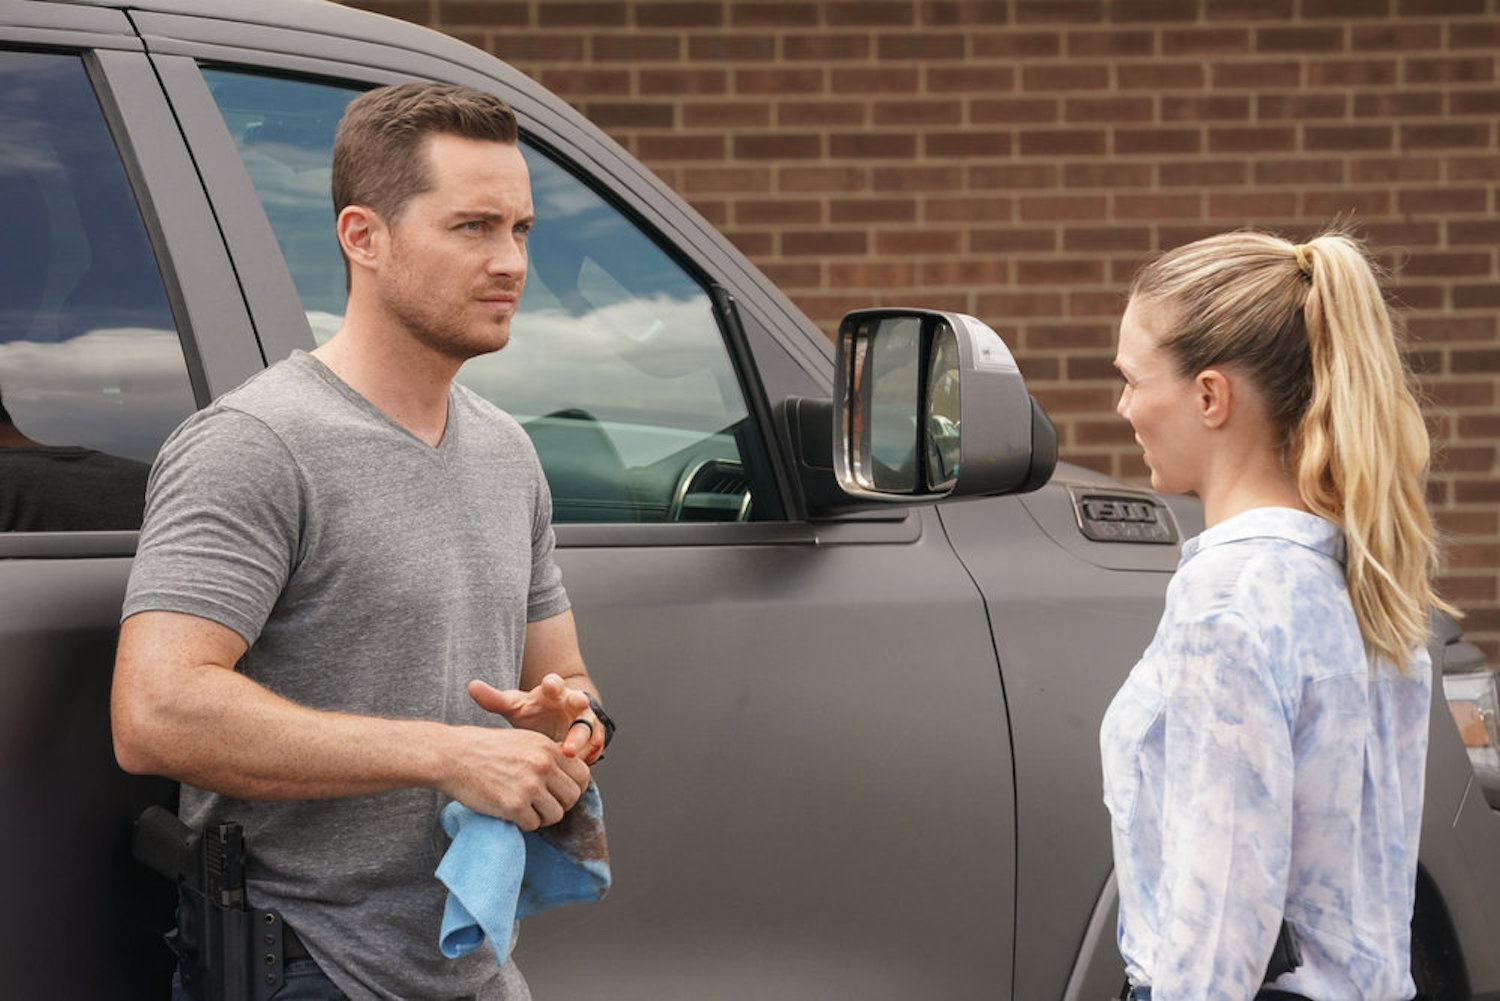 Jay Halstead and Hailey Upton talking outside in 'Chicago P.D.' Season 10